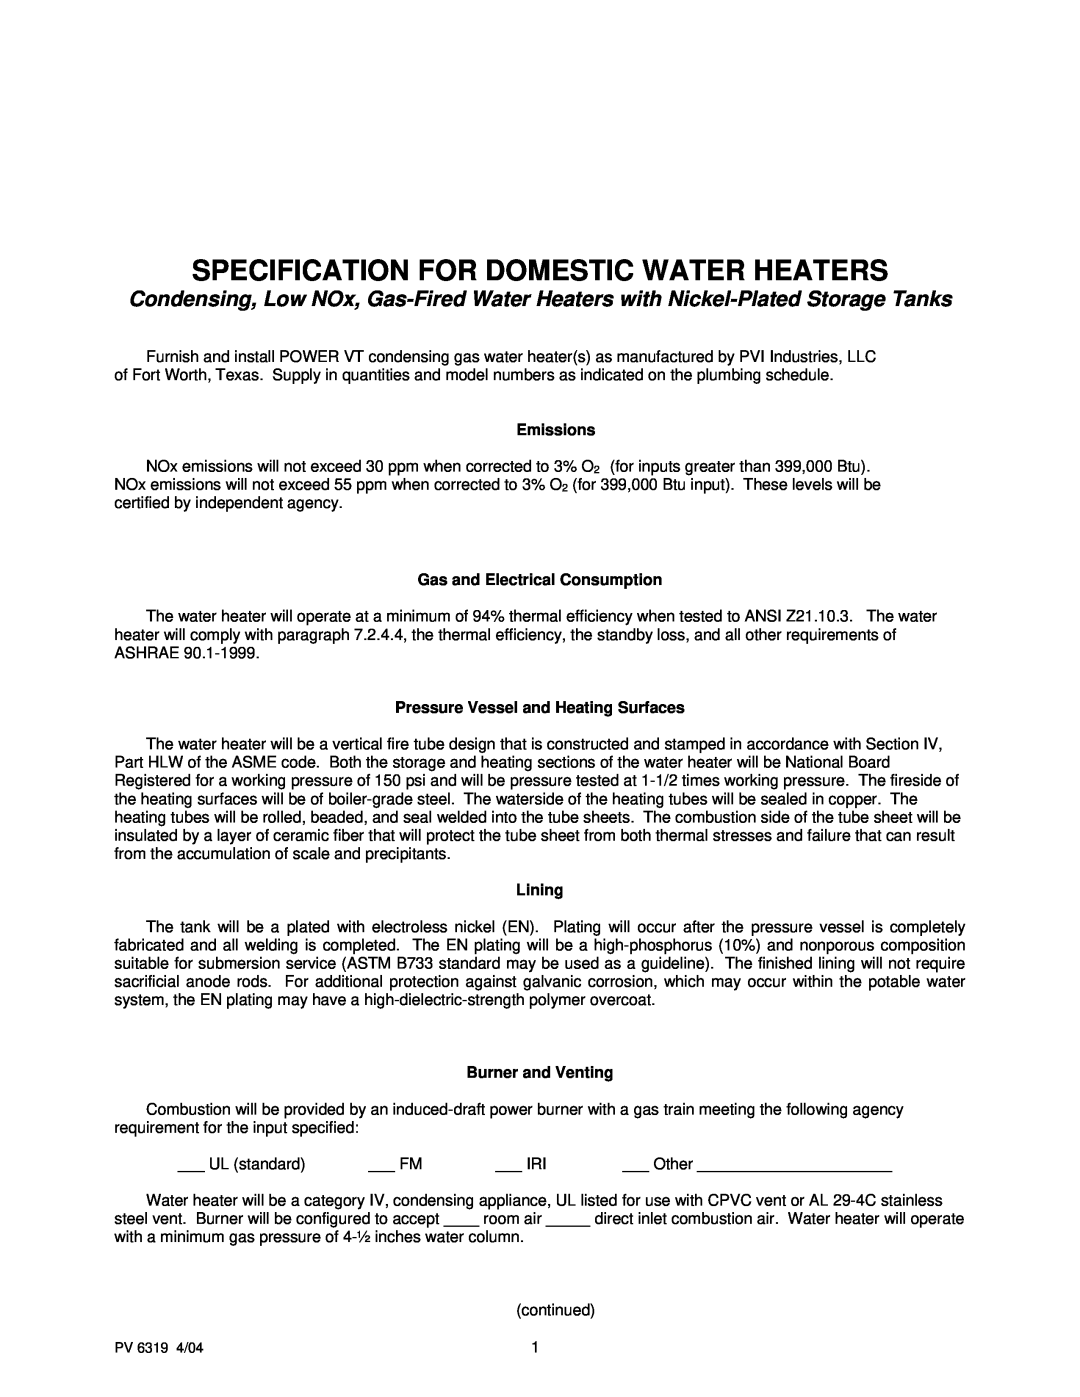 PVI Industries PV 6319 manual Specification For Domestic Water Heaters, Emissions, Gas and Electrical Consumption, Lining 